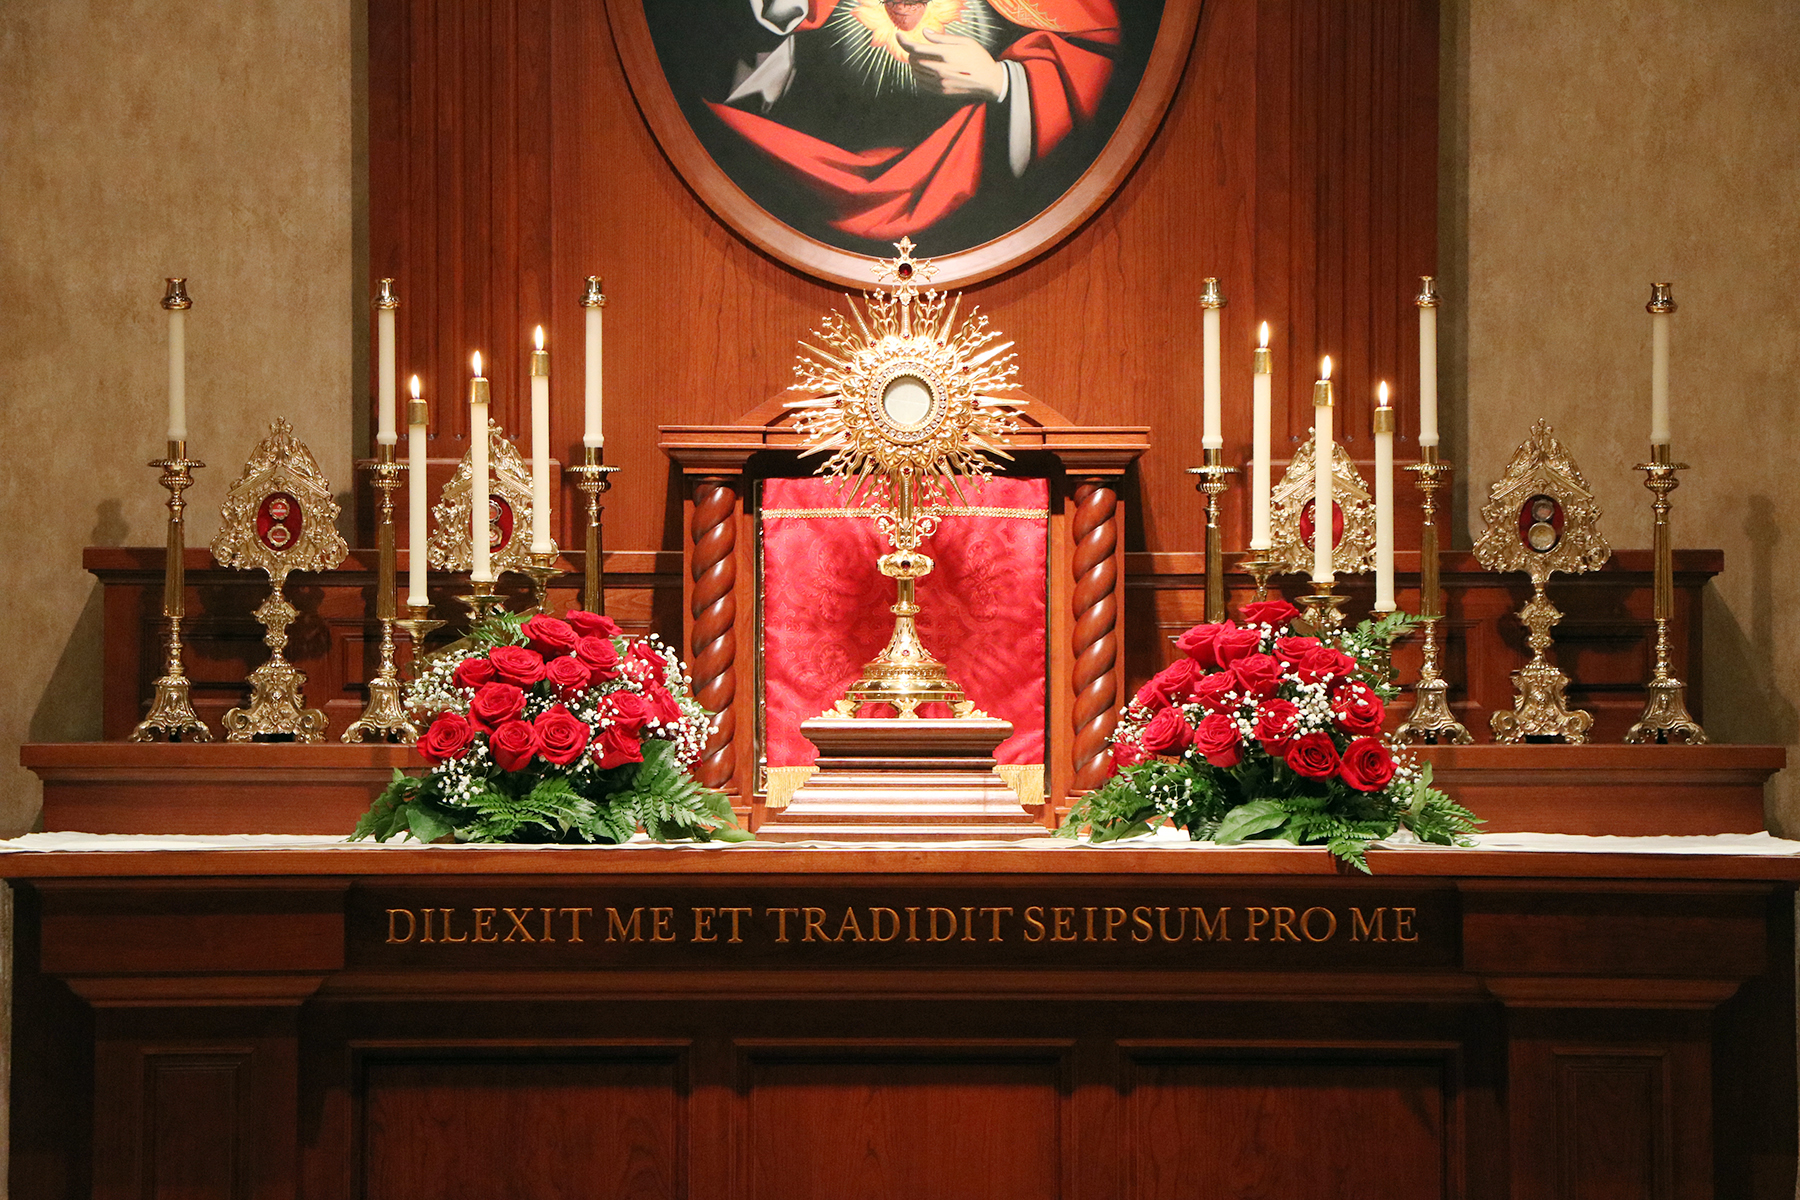 Let us adore Christ in the Blessed Sacrament